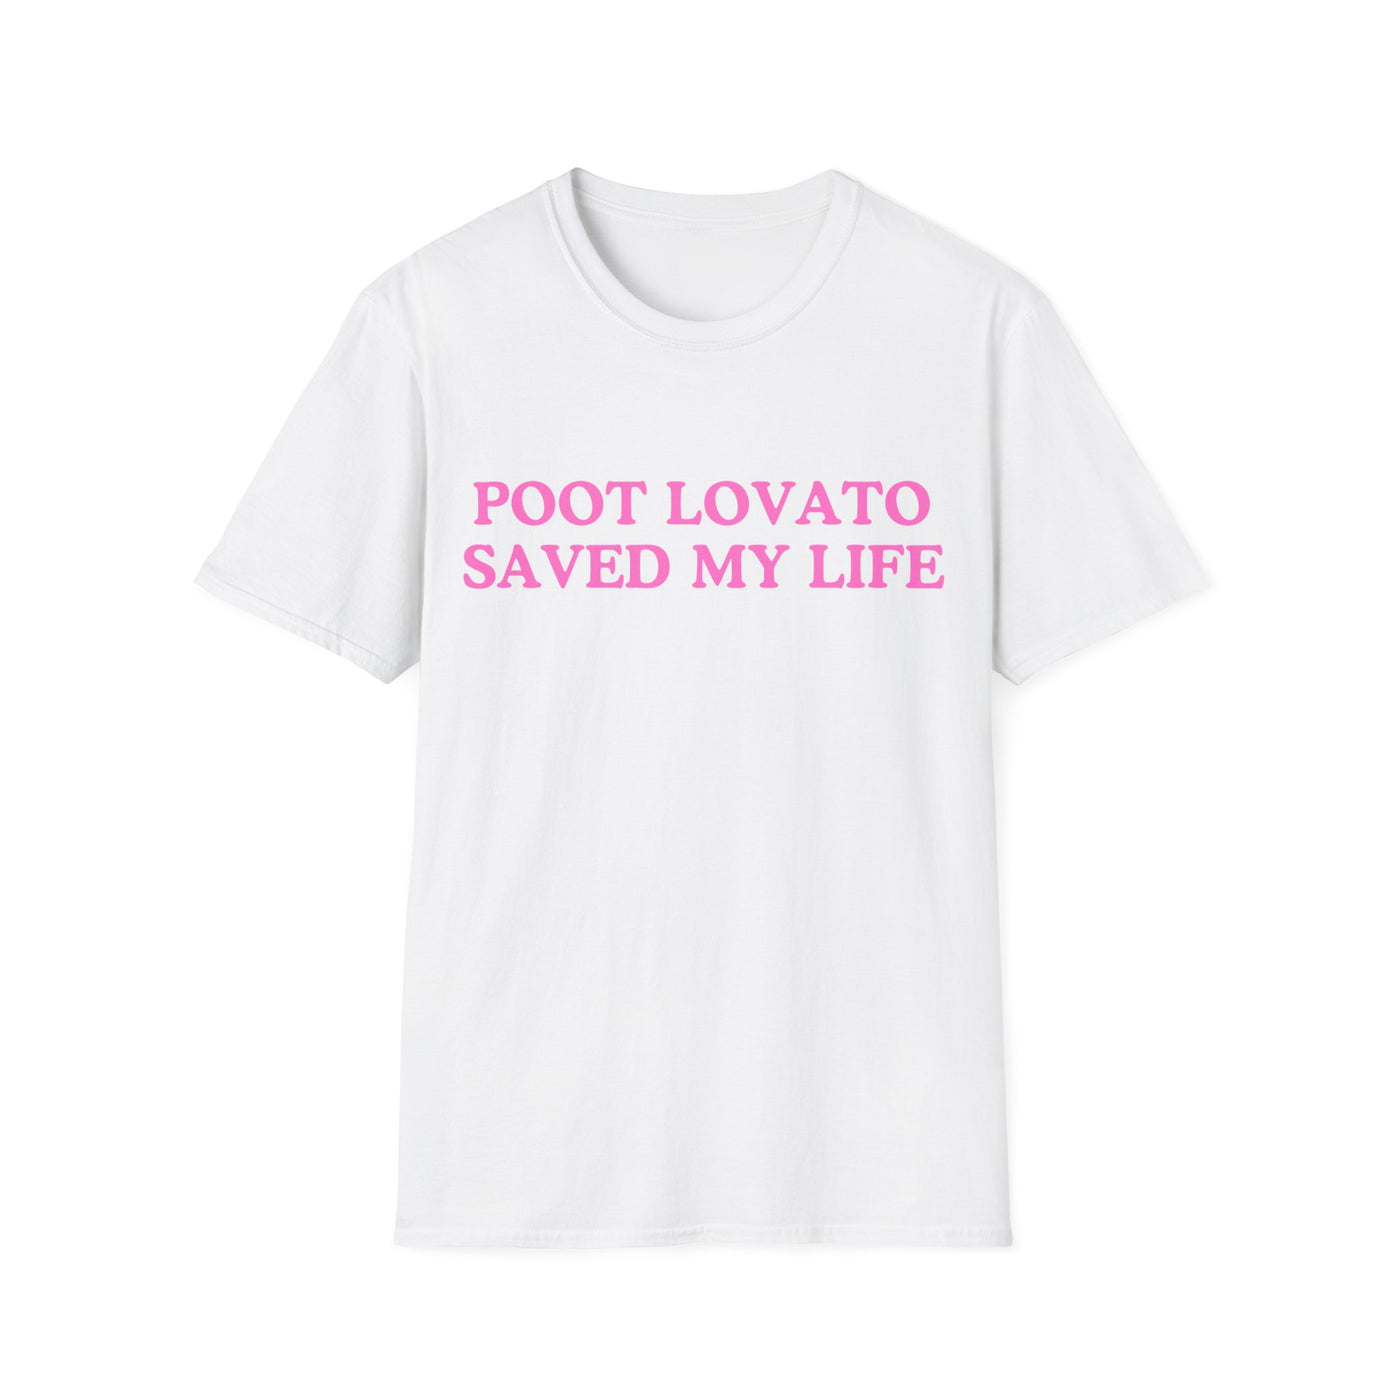 Poot Lovato Saved My Life